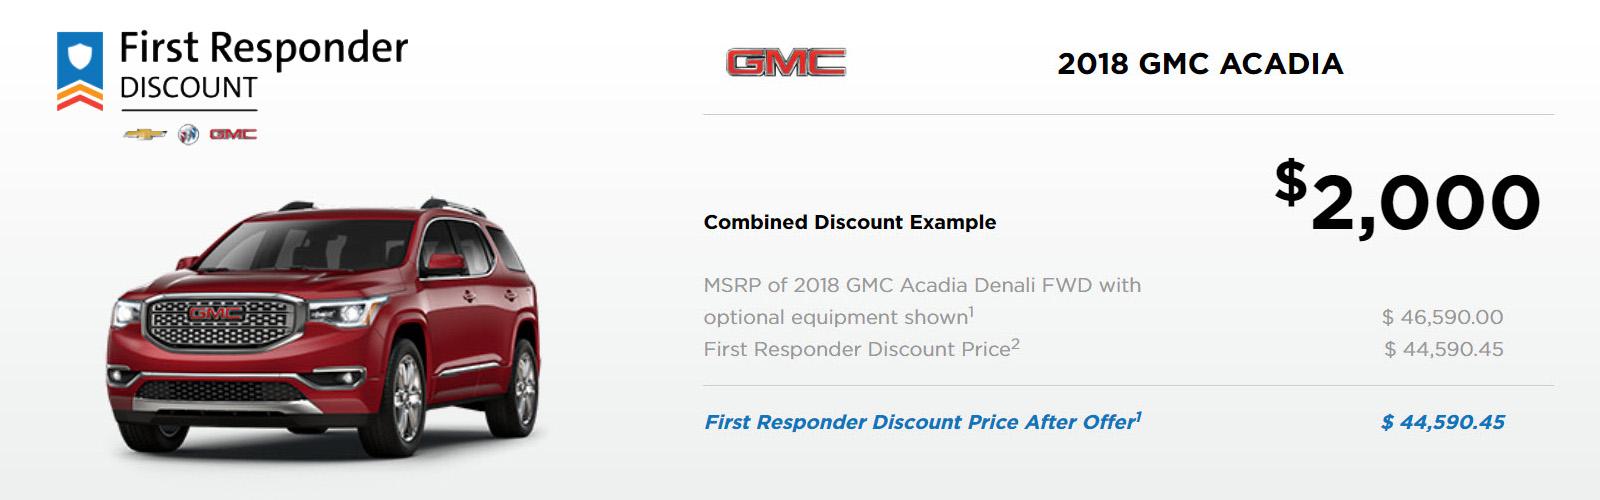 First Responder GMC Acadia Example Discount 